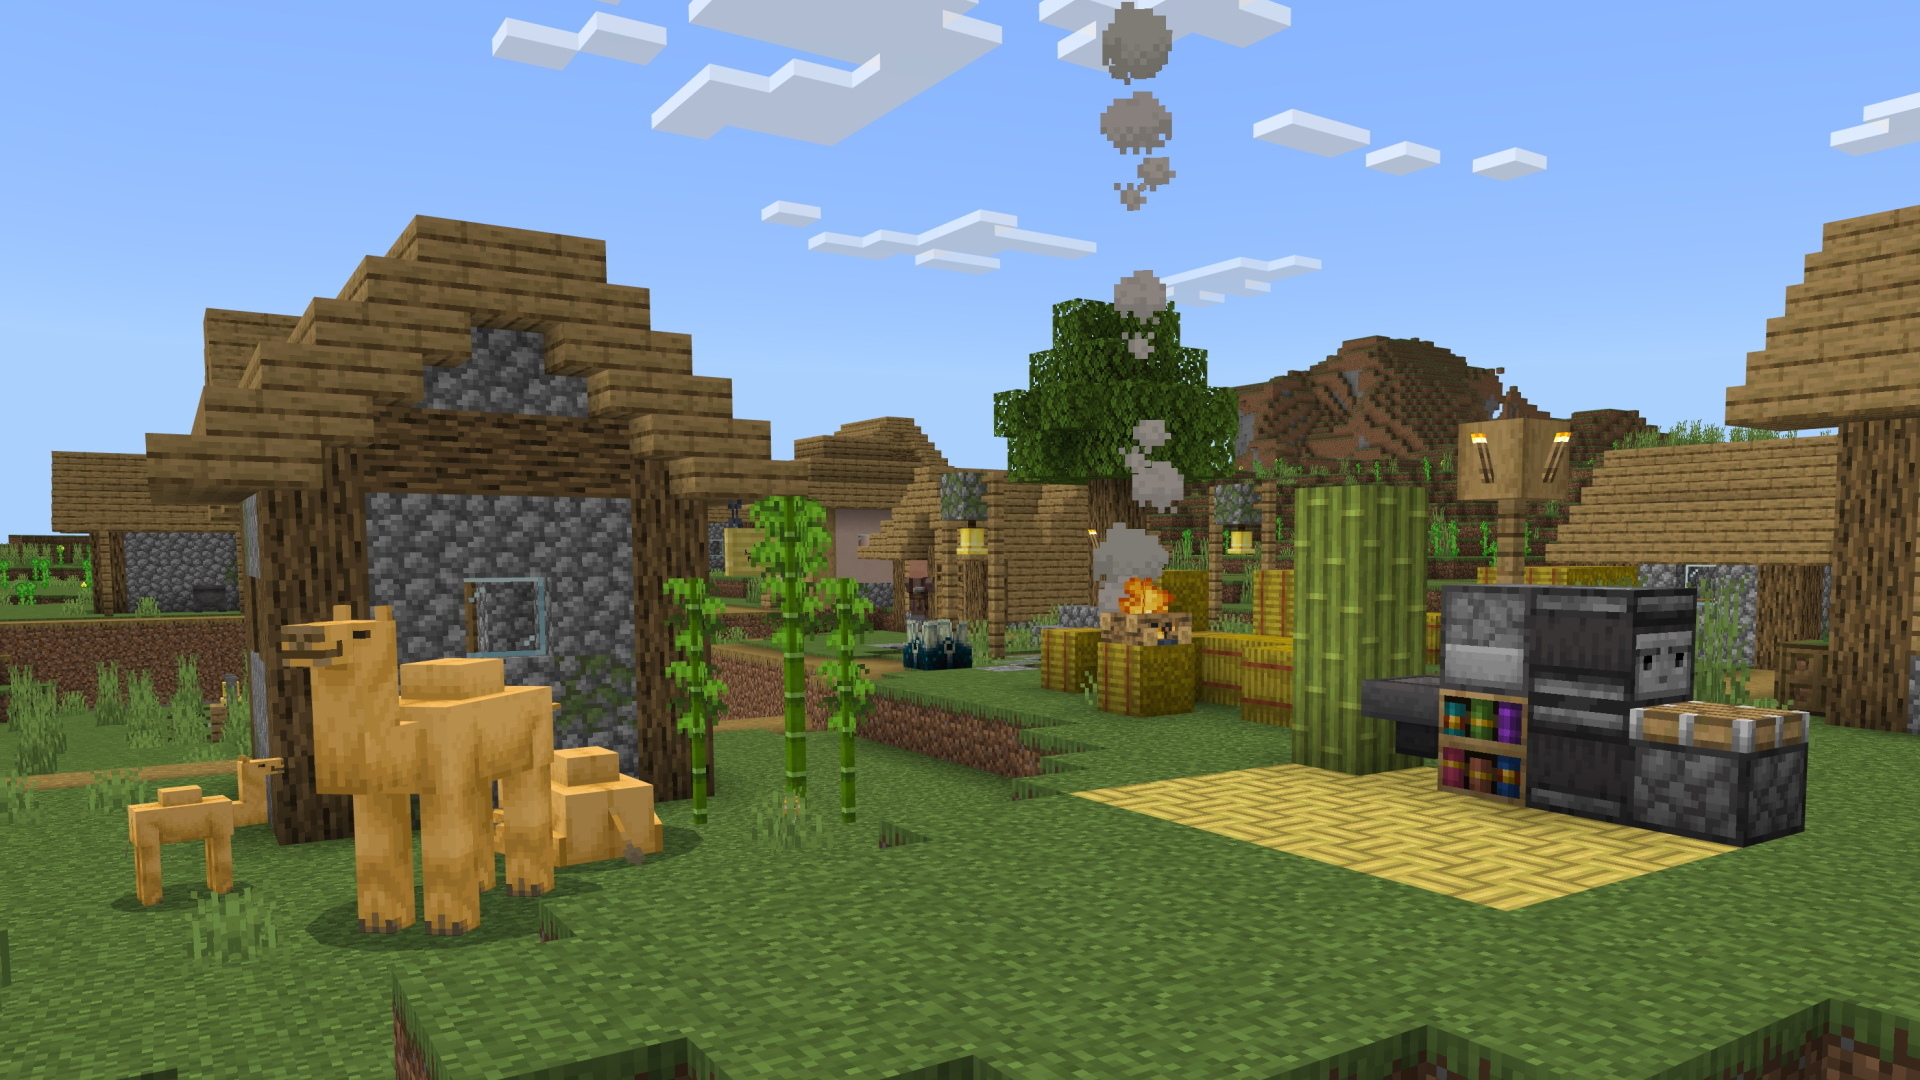 Minecraft Preview 1.19.60.23, set in a village with camels, chiseled shelves, bamboo, and more.